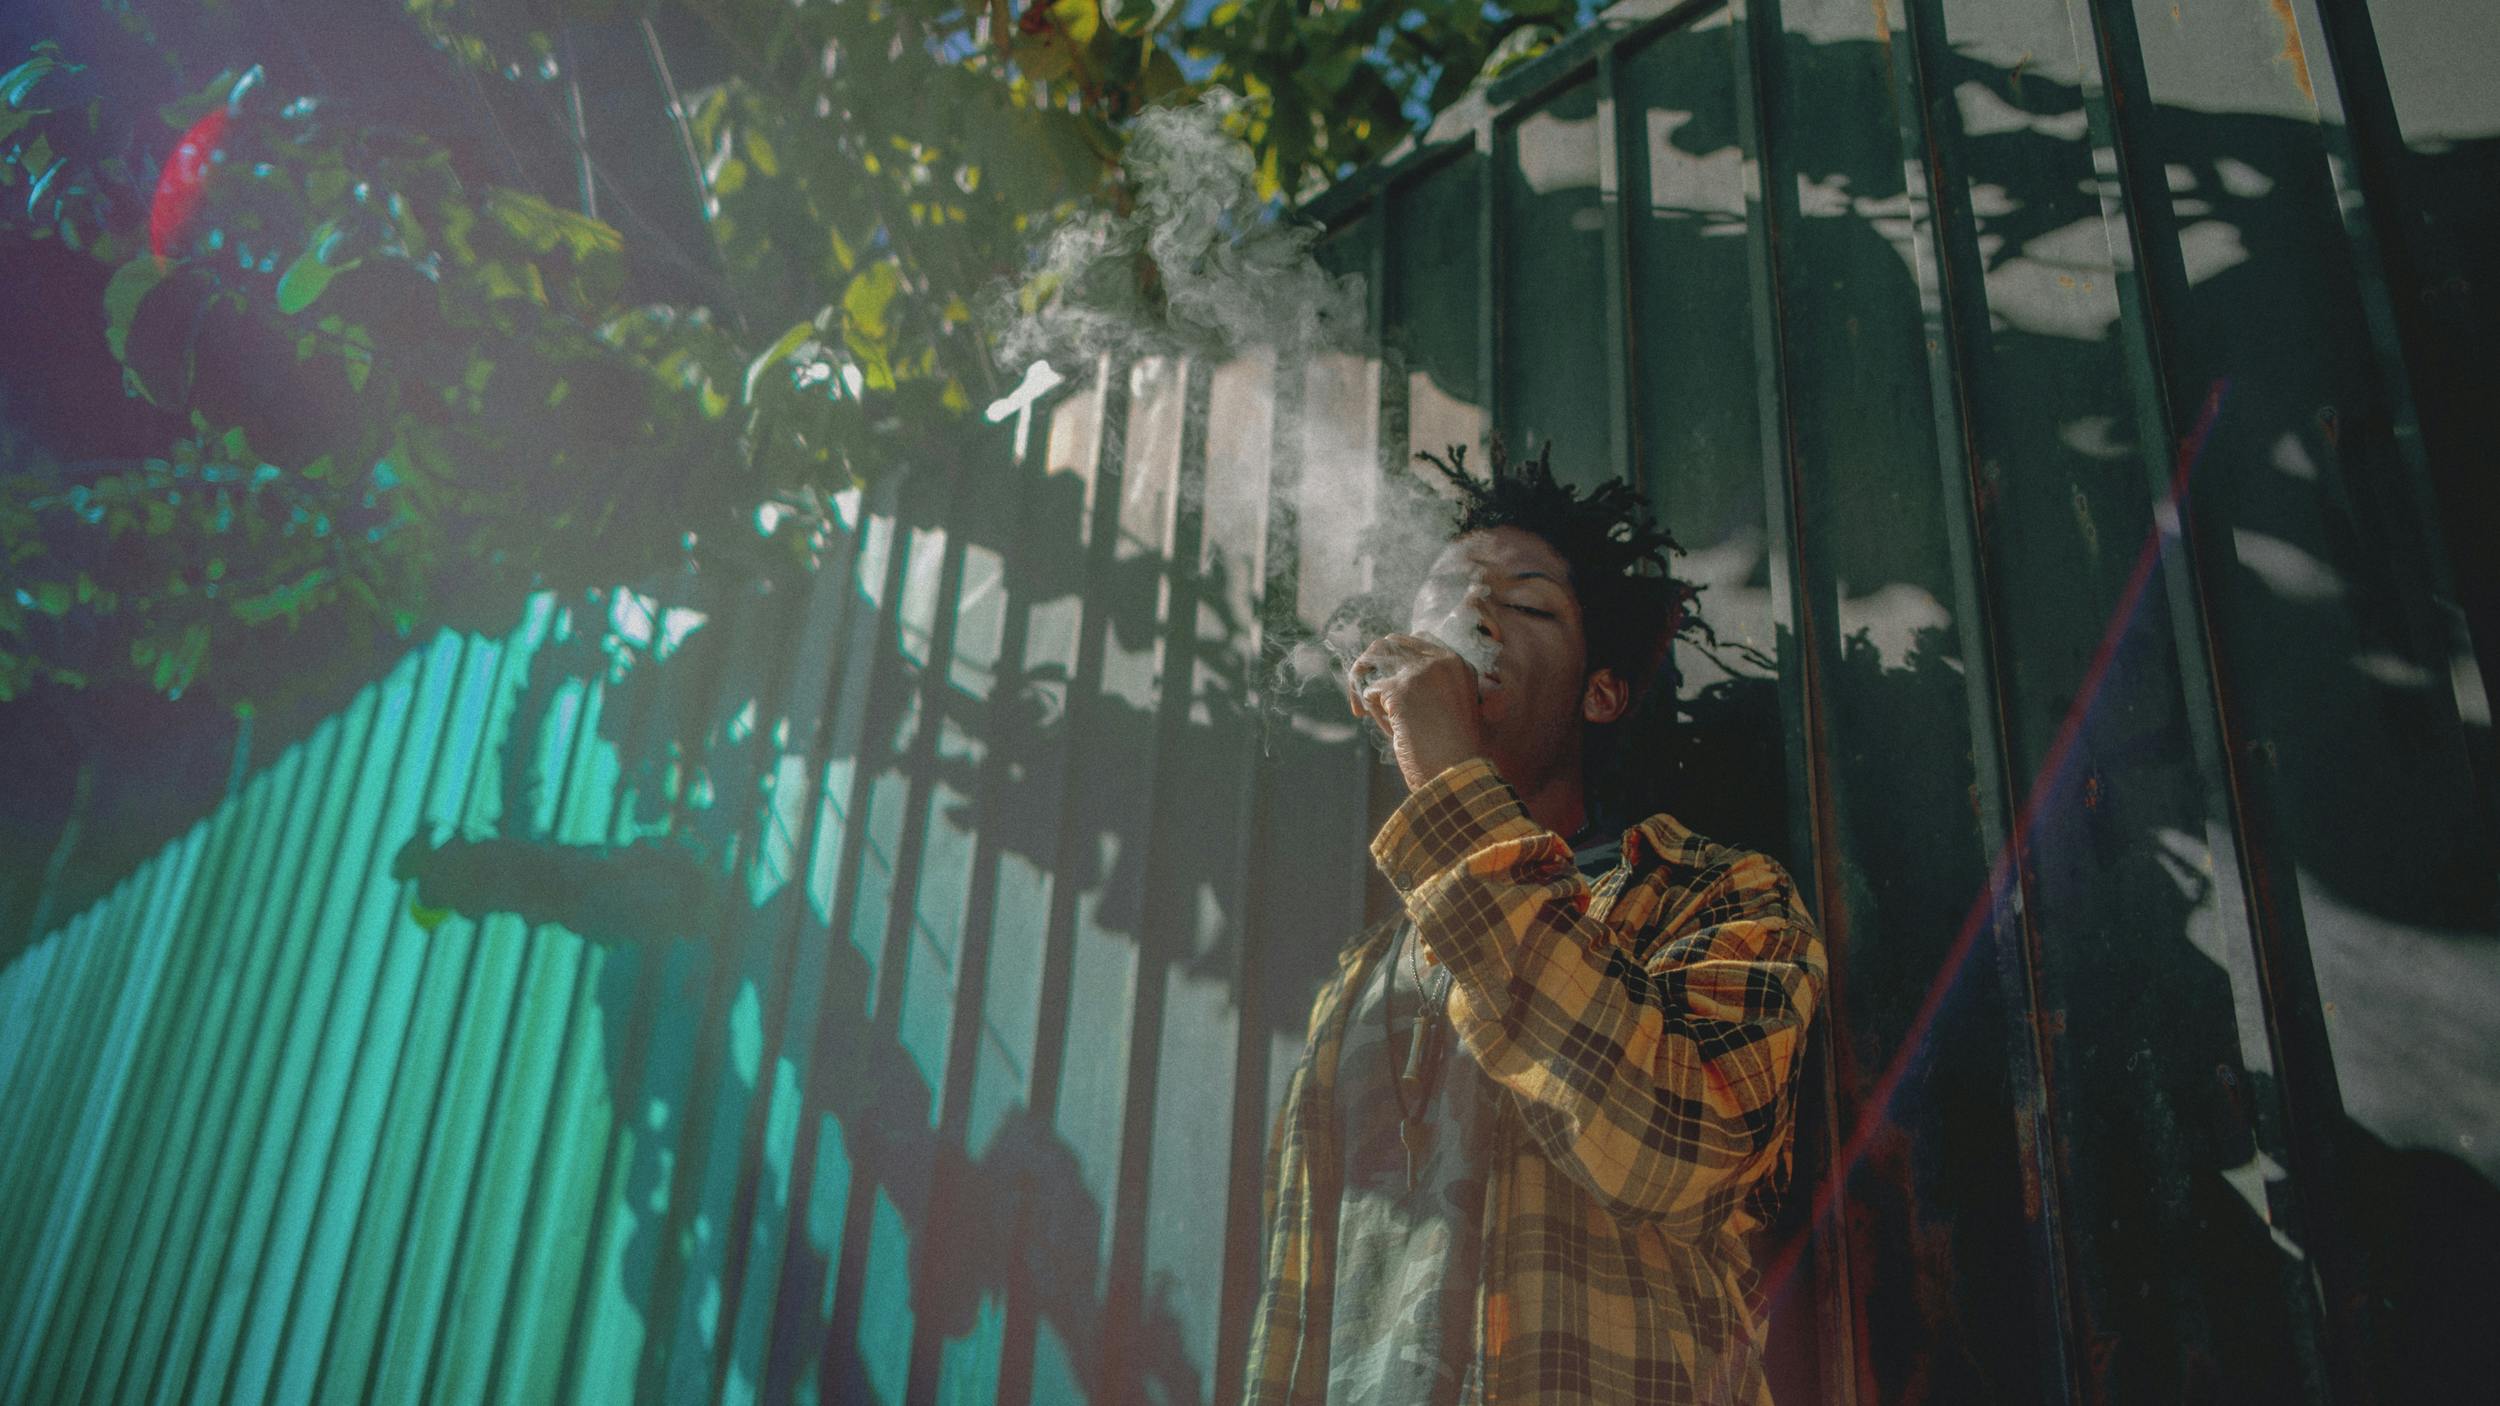 A man leans against a fence and enjoys one of the best weed vaporizers